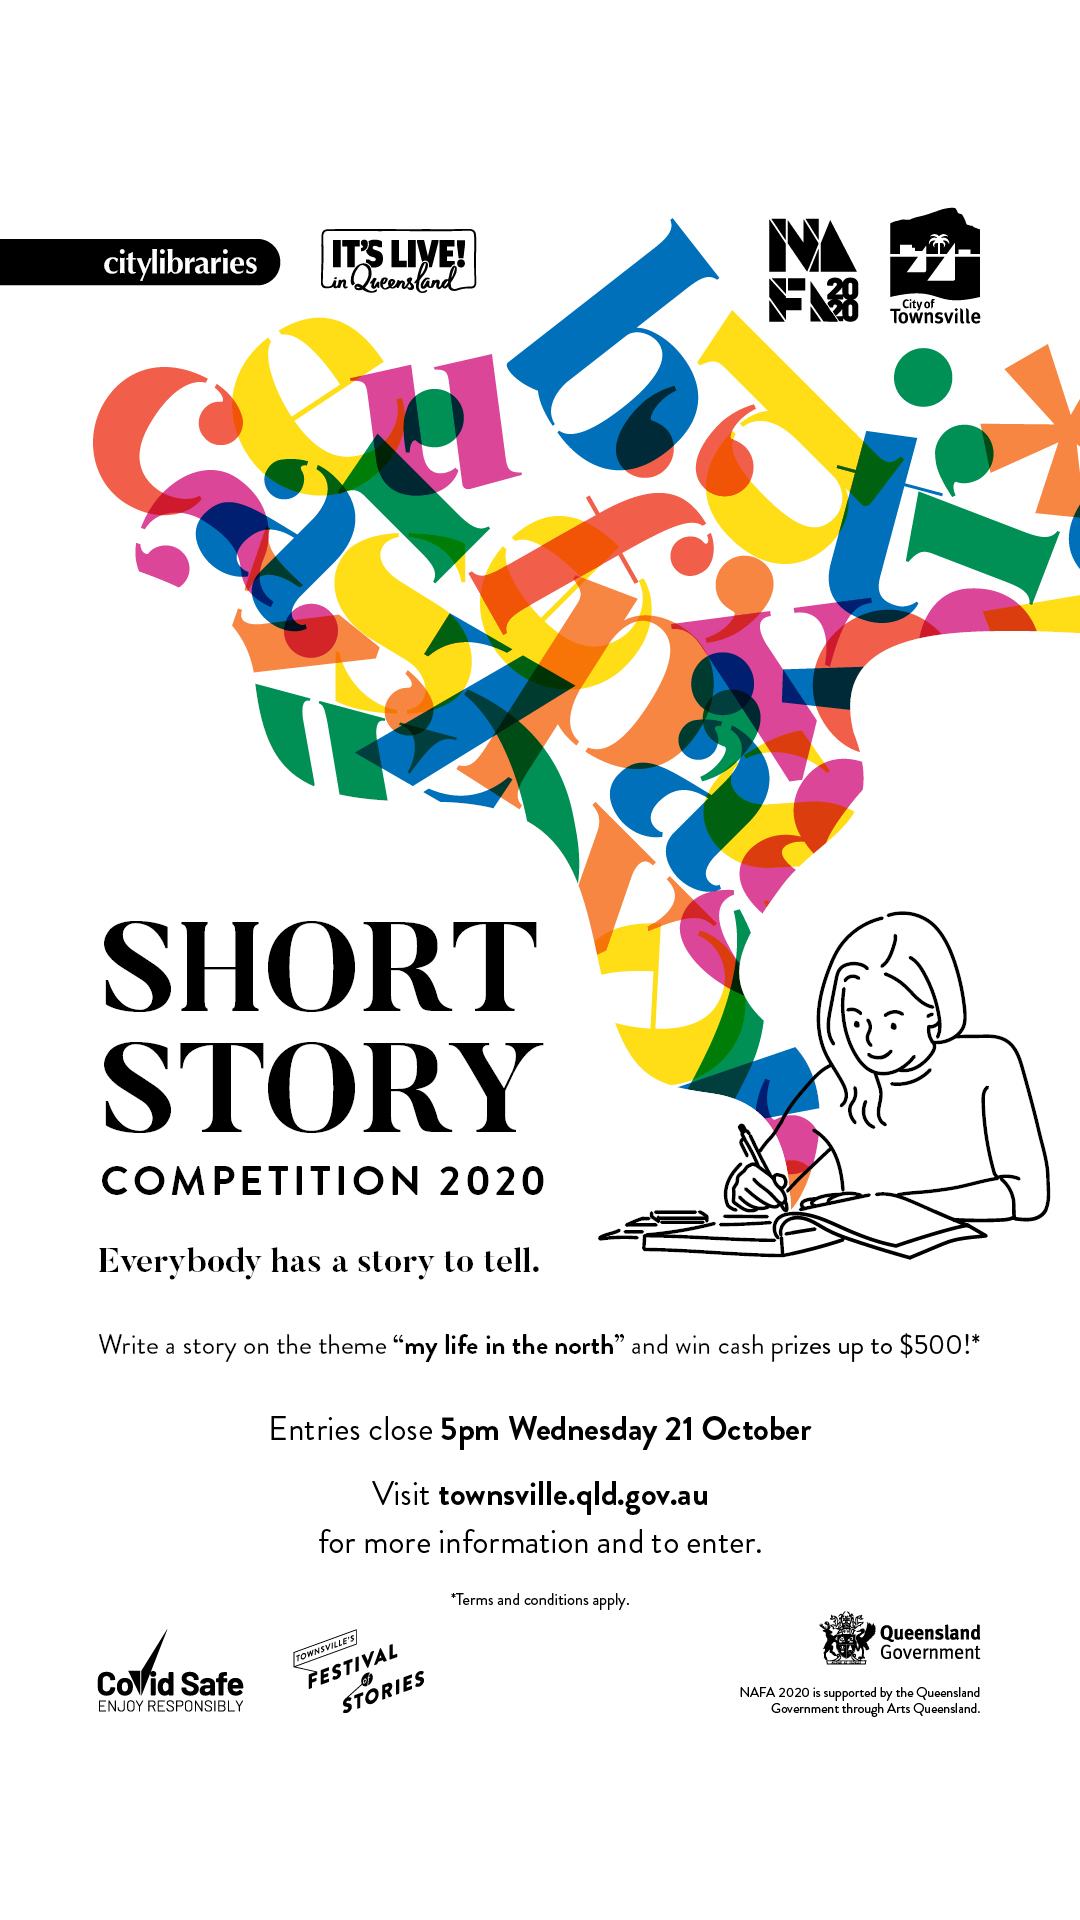 creative writing ink short story competition